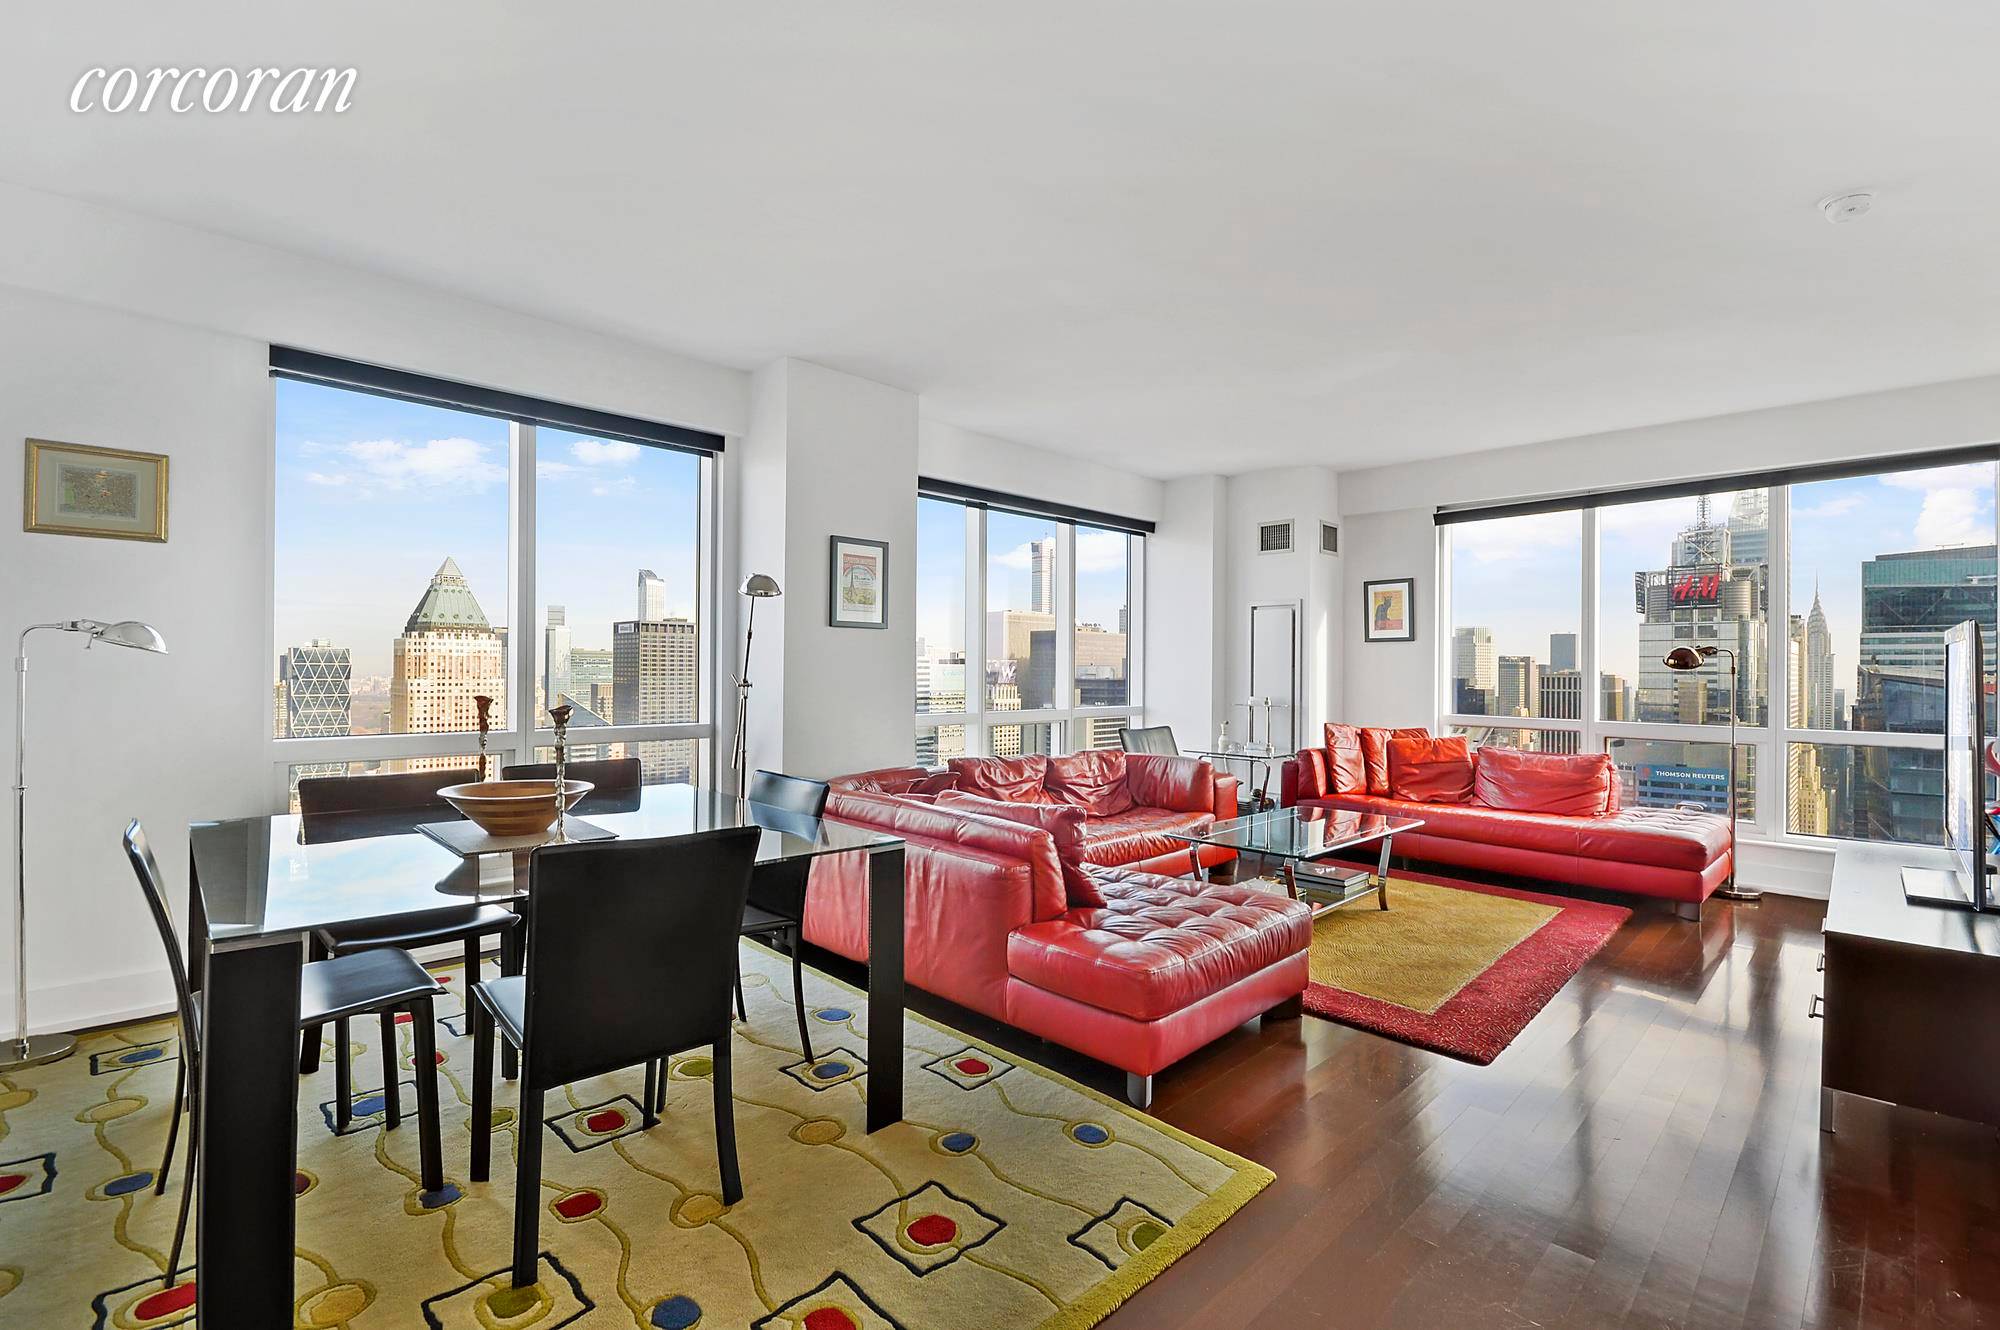 Enjoy life at the Top ! Spectacular 59th floor two bedroom corner home at The Orion Condominium.